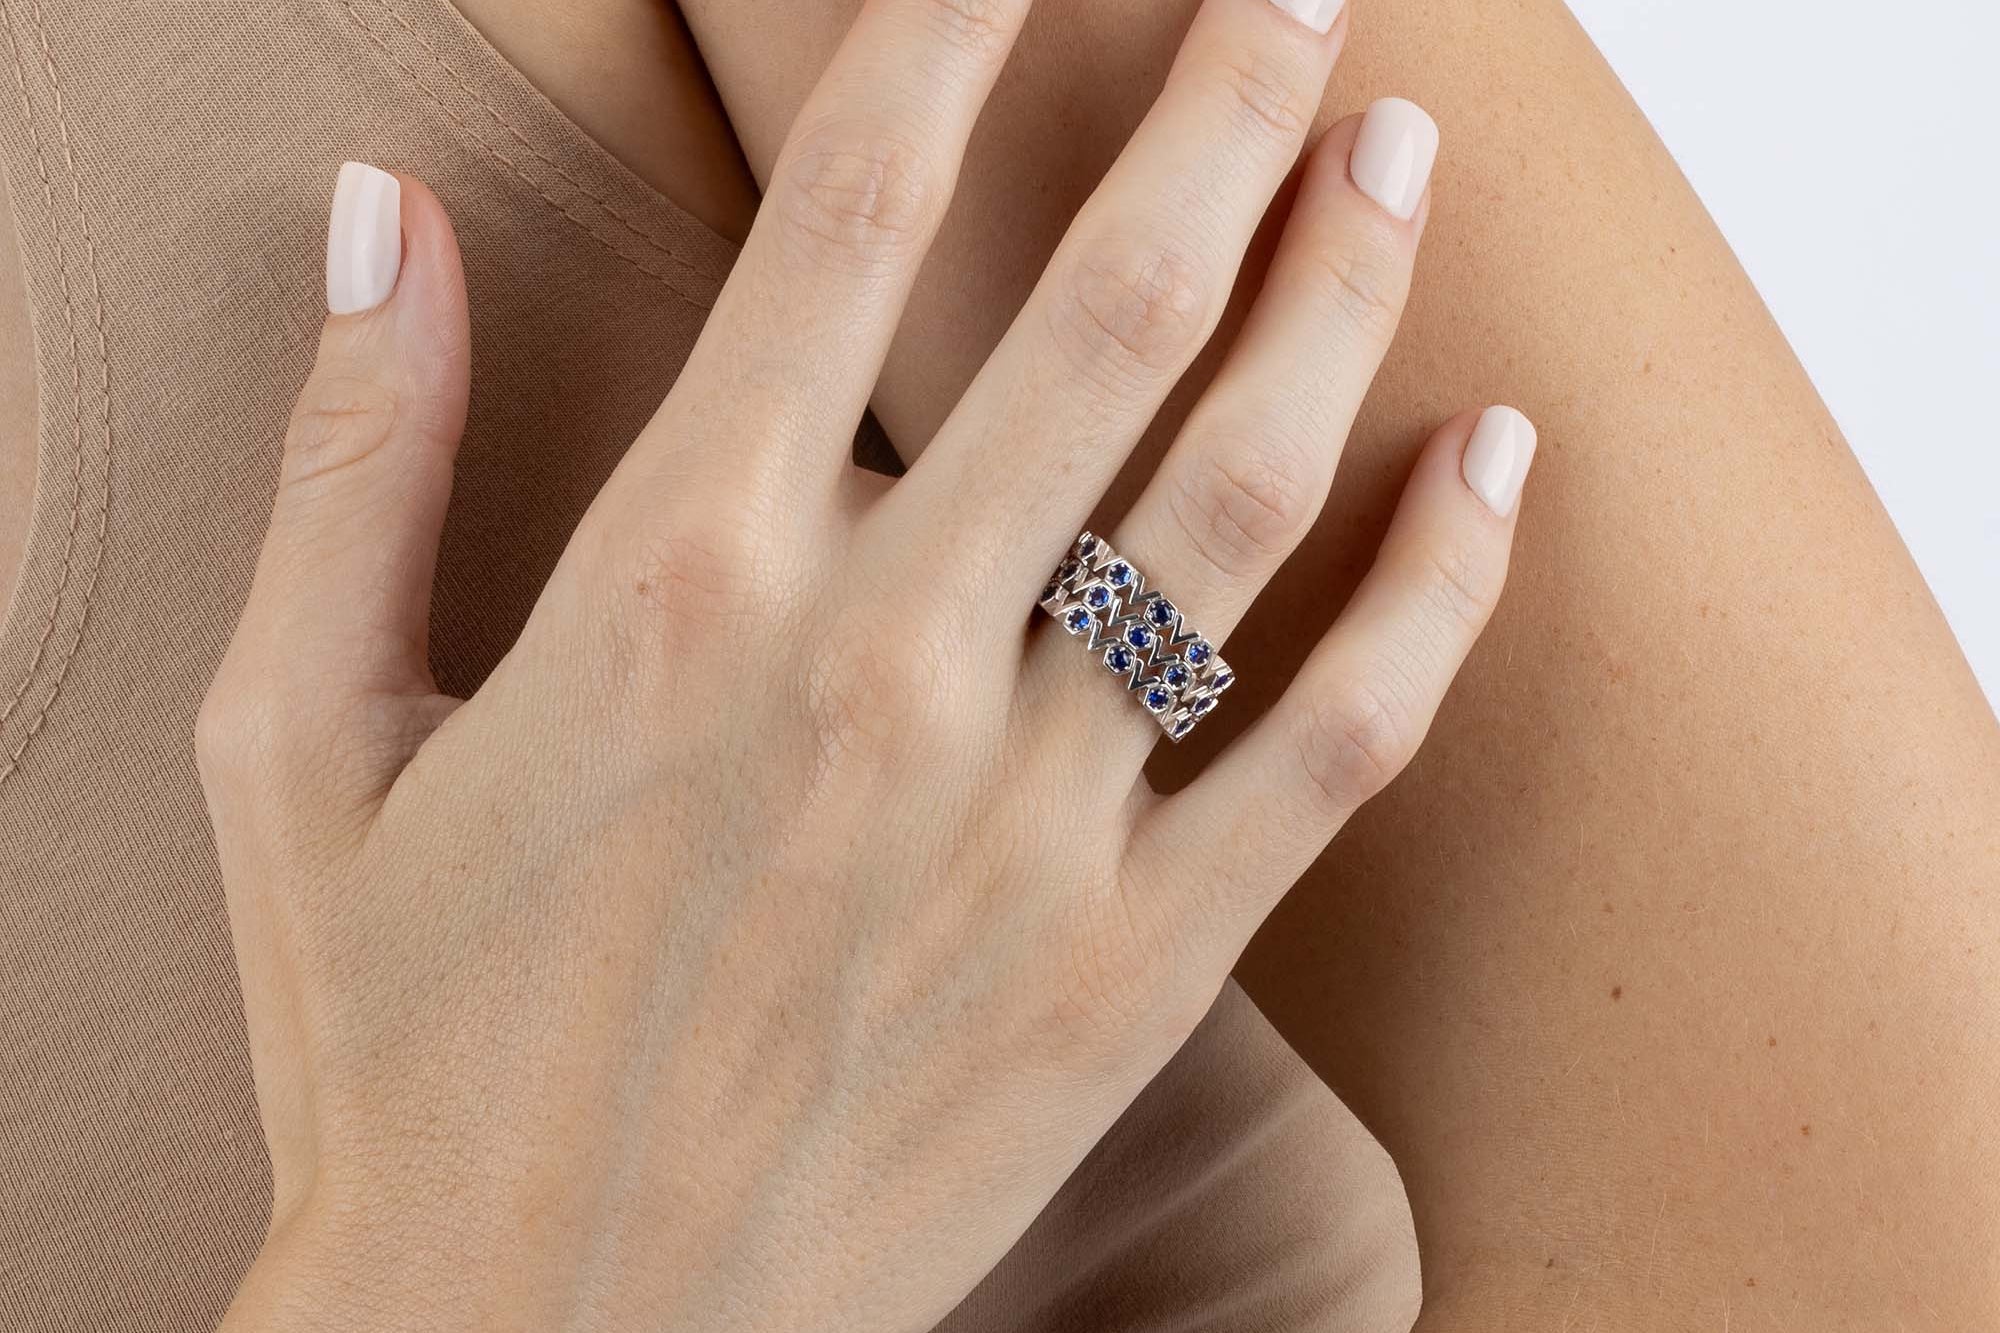 Stack of three White Gold and Blue Sapphire Rings with octagons and V shapes, Medium - Model shot